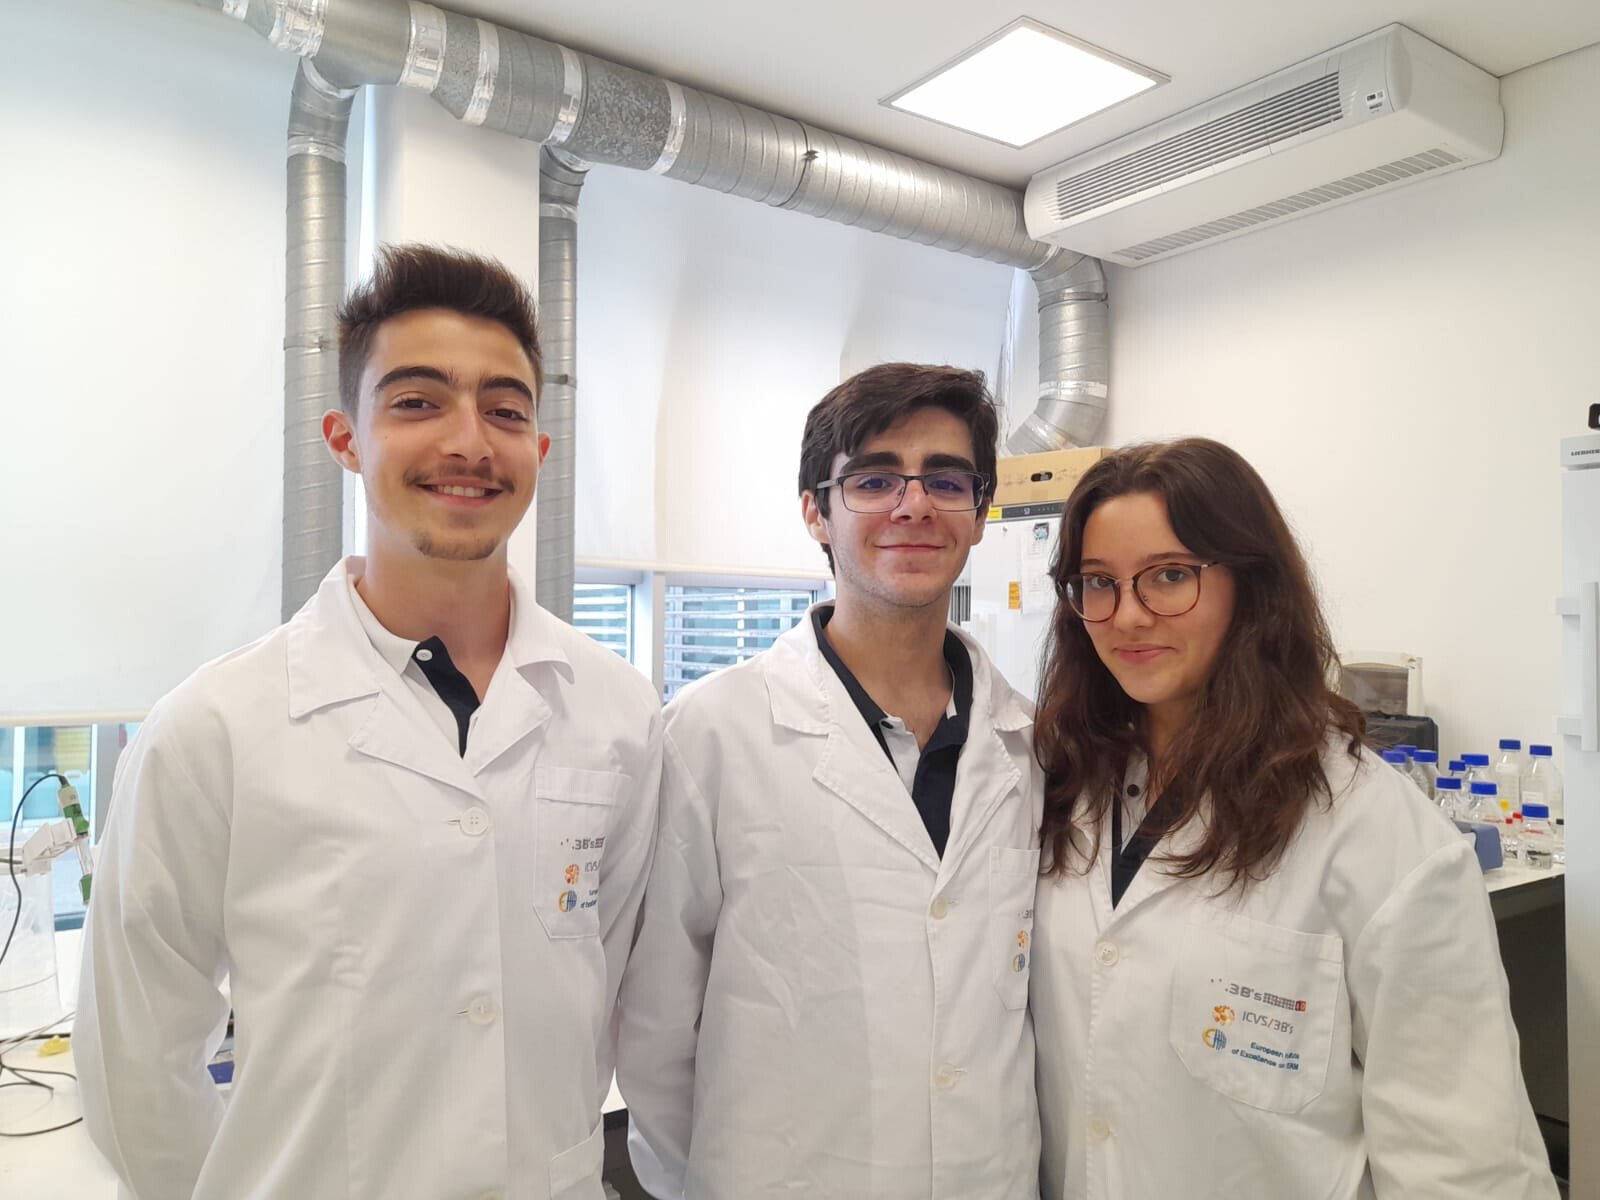 Porto students compete in an international science competition